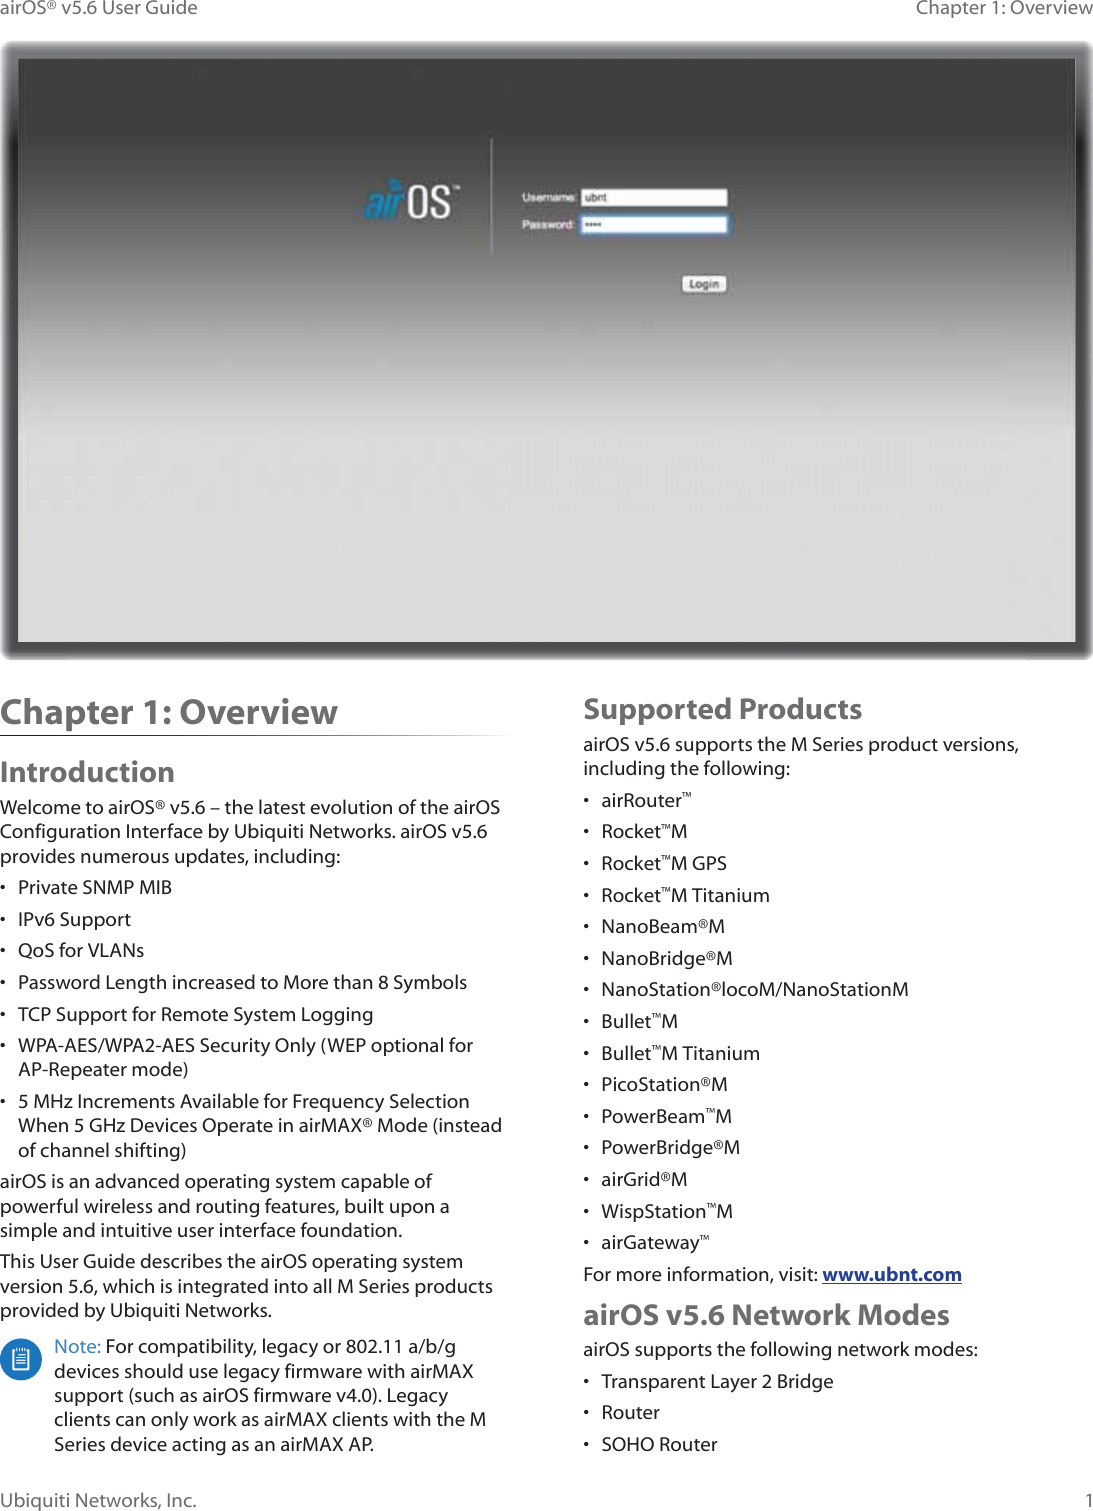 1Chapter 1: OverviewairOS® v5.6 User GuideUbiquiti Networks, Inc.Supported ProductsairOS v5.6 supports the M Series product versions, including the following:• airRouter™• Rocket™M• Rocket™M GPS• Rocket™M Titanium• NanoBeam®M • NanoBridge®M• NanoStation®locoM/NanoStationM• Bullet™M• Bullet™M Titanium• PicoStation®M• PowerBeam™M• PowerBridge®M• airGrid®M• WispStation™M• airGateway™For more information, visit: www.ubnt.comairOS v5.6 Network ModesairOS supports the following network modes:•  Transparent Layer 2 Bridge• Router• SOHO RouterChapter 1: OverviewIntroductionWelcome to airOS® v5.6 – the latest evolution of the airOS &amp;RQILJXUDWLRQ©,QWHUIDFH©E\©8ELTXLWL©1HWZRUNV©DLU26Y©provides numerous updates, including:•  Private SNMP MIB• IPv6 Support•  QoS for VLANs•  Password Length increased to More than 8 Symbols•  TCP Support for Remote System Logging•  WPA-AES/WPA2-AES Security Only (WEP optional for AP-Repeater mode)•  5 MHz Increments Available for Frequency Selection When 5 GHz Devices Operate in airMAX® Mode (instead of channel shifting)airOS is an advanced operating system capable of powerful wireless and routing features, built upon a simple and intuitive user interface foundation.This User Guide describes the airOS operating system version 5.6, which is integrated into all M Series products provided by Ubiquiti Networks.Note: For compatibility, legacy or 802.11 a/b/g devices should use legacy firmware with airMAX support (such as airOS firmware v4.0). Legacy clients can only work as airMAX clients with the M Series device acting as an airMAX AP. 